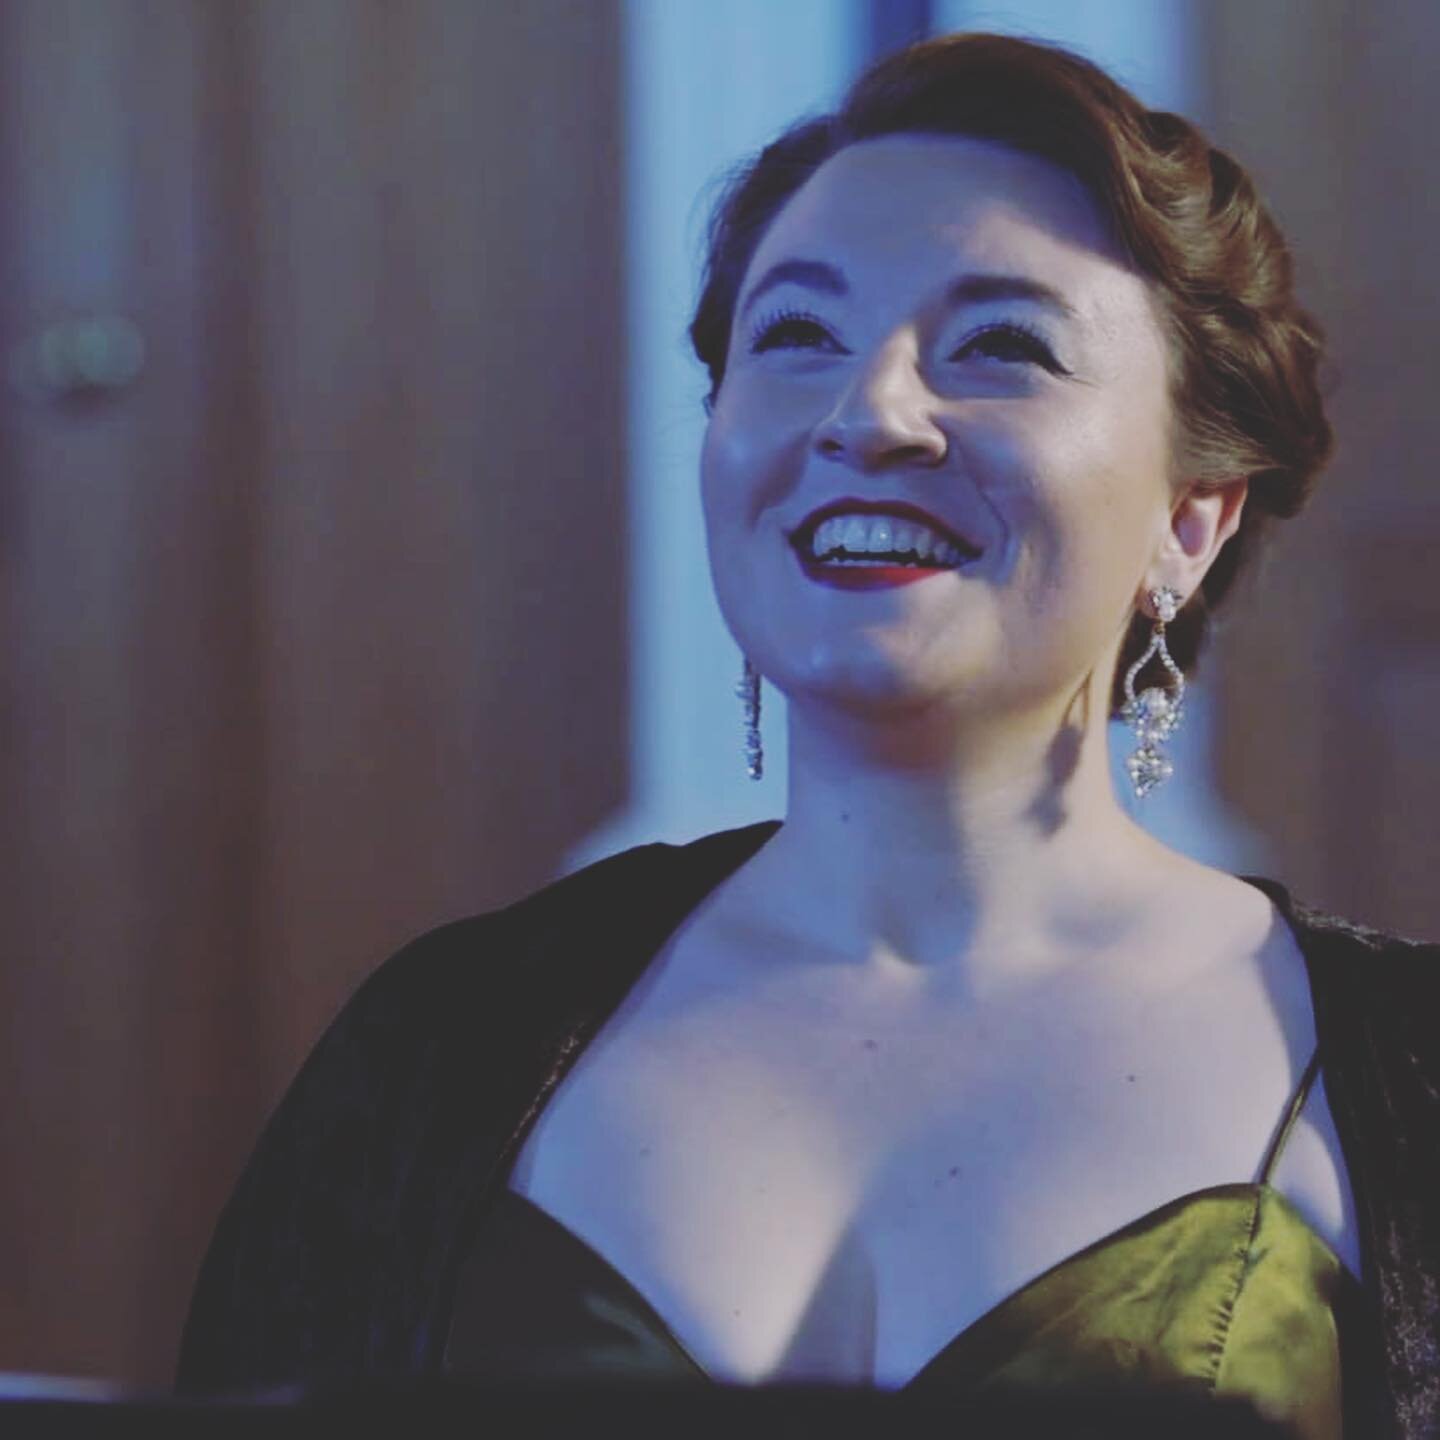 🌟Joy🌟
.
It has been almost two weeks since my live performance with Sempre Chamber Ensemble.💫
.
What a beautiful opportunity it was to sing gorgeous music and collaborate with other musicians!🌞
.
Before the pandemic hit in the US, I was having a 